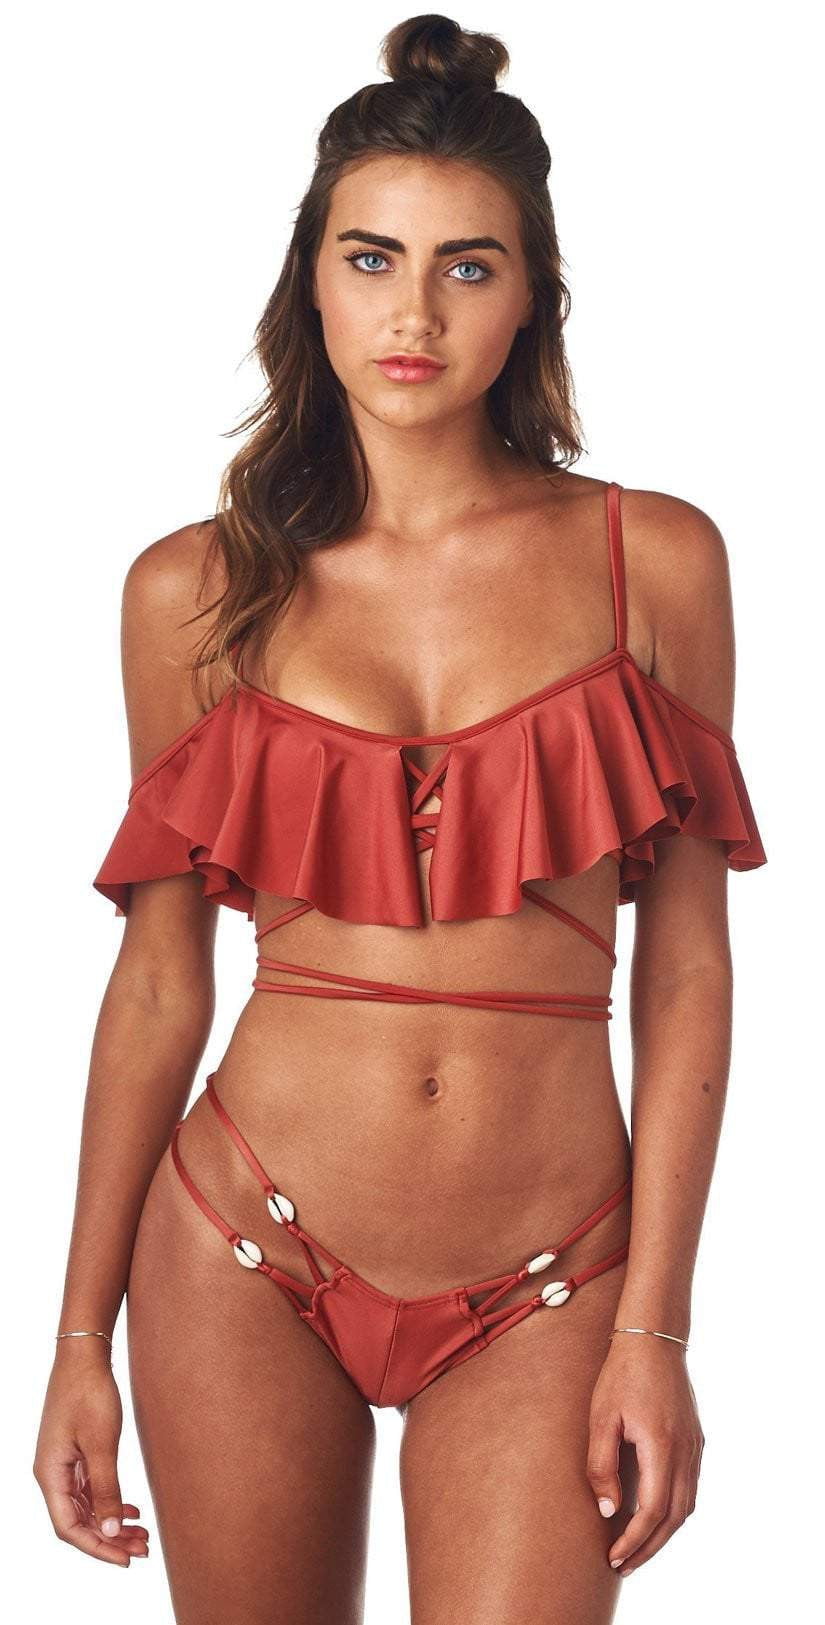 South Beach Swimsuits Montce Cage Bralette Top in Red Floral – South Beach  Swimsuits